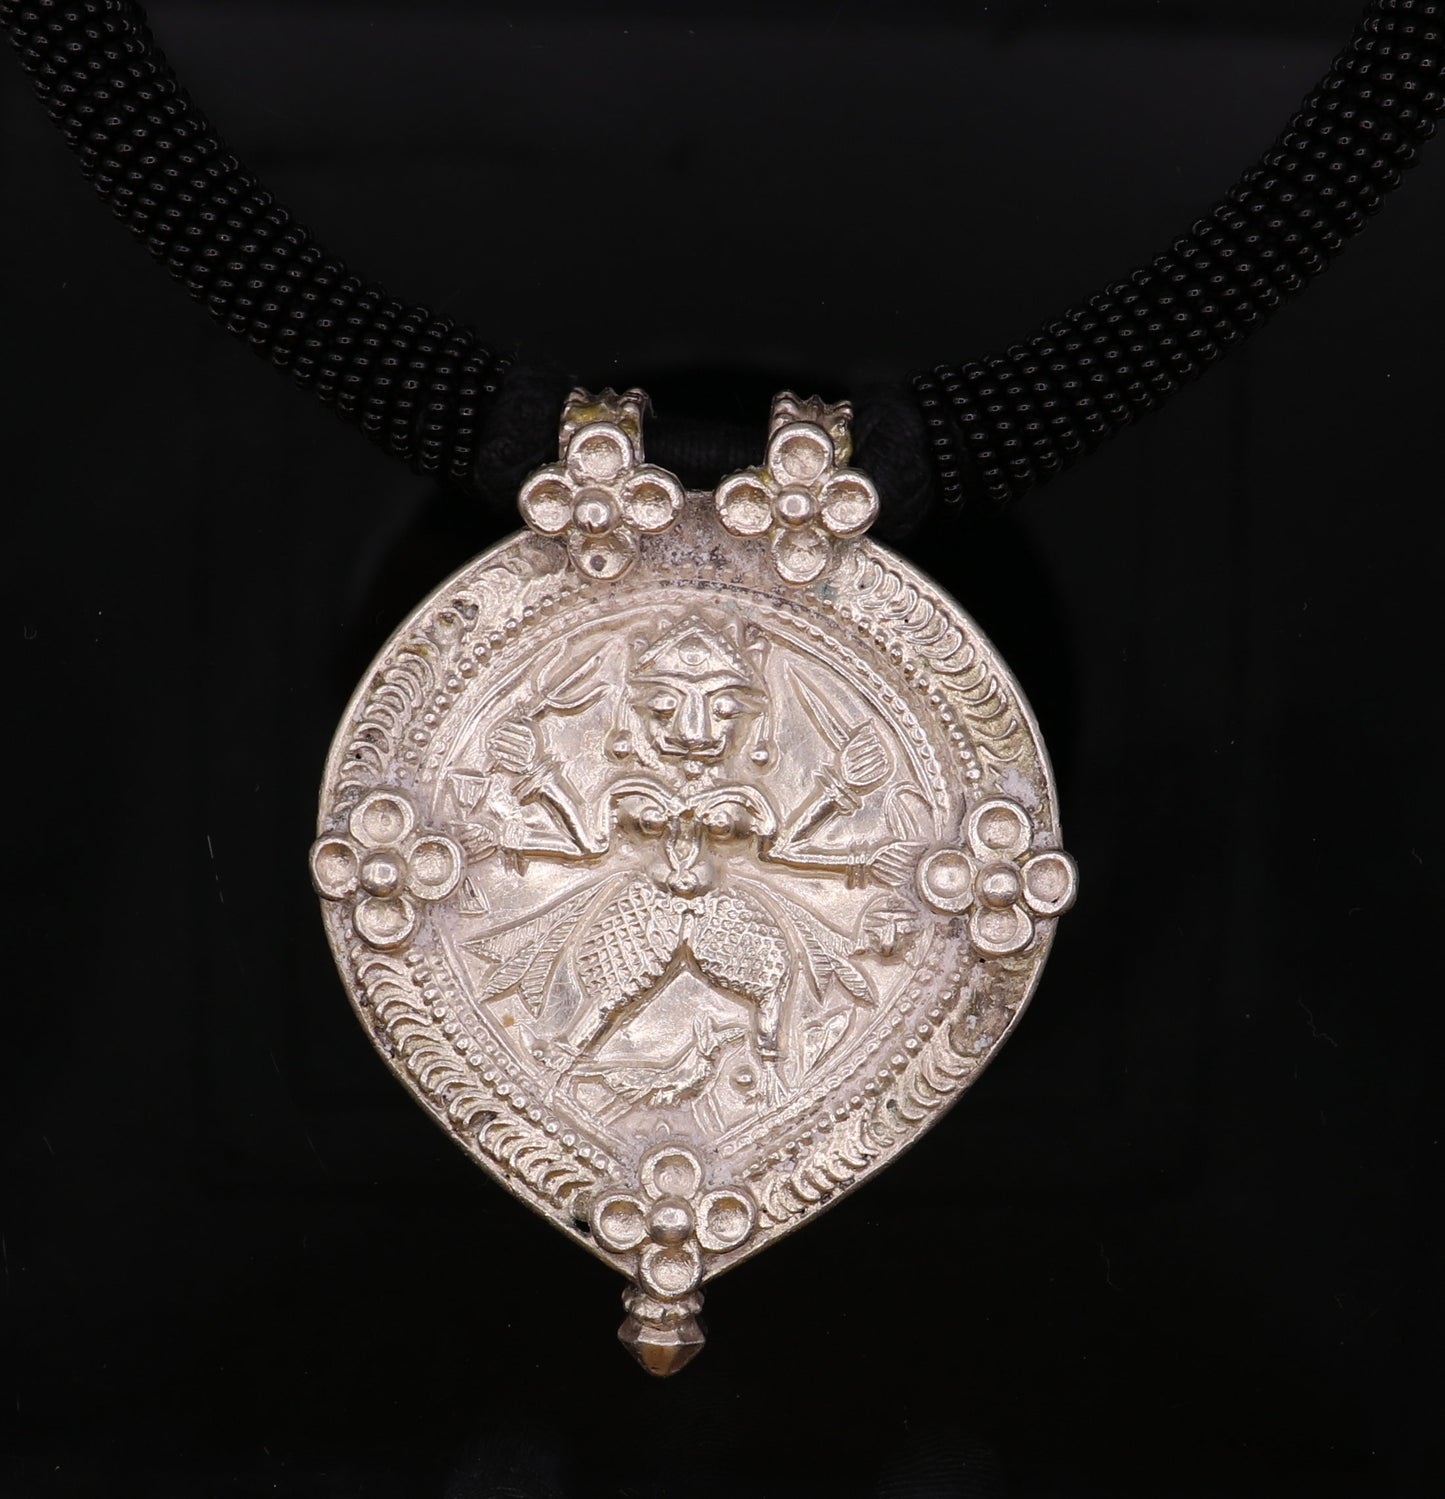 Vintage design handmade solid silver ethnic fabulous tribal deity god Bheruji pendant necklace ethnic jewelry from Rajasthan India osn07 - TRIBAL ORNAMENTS